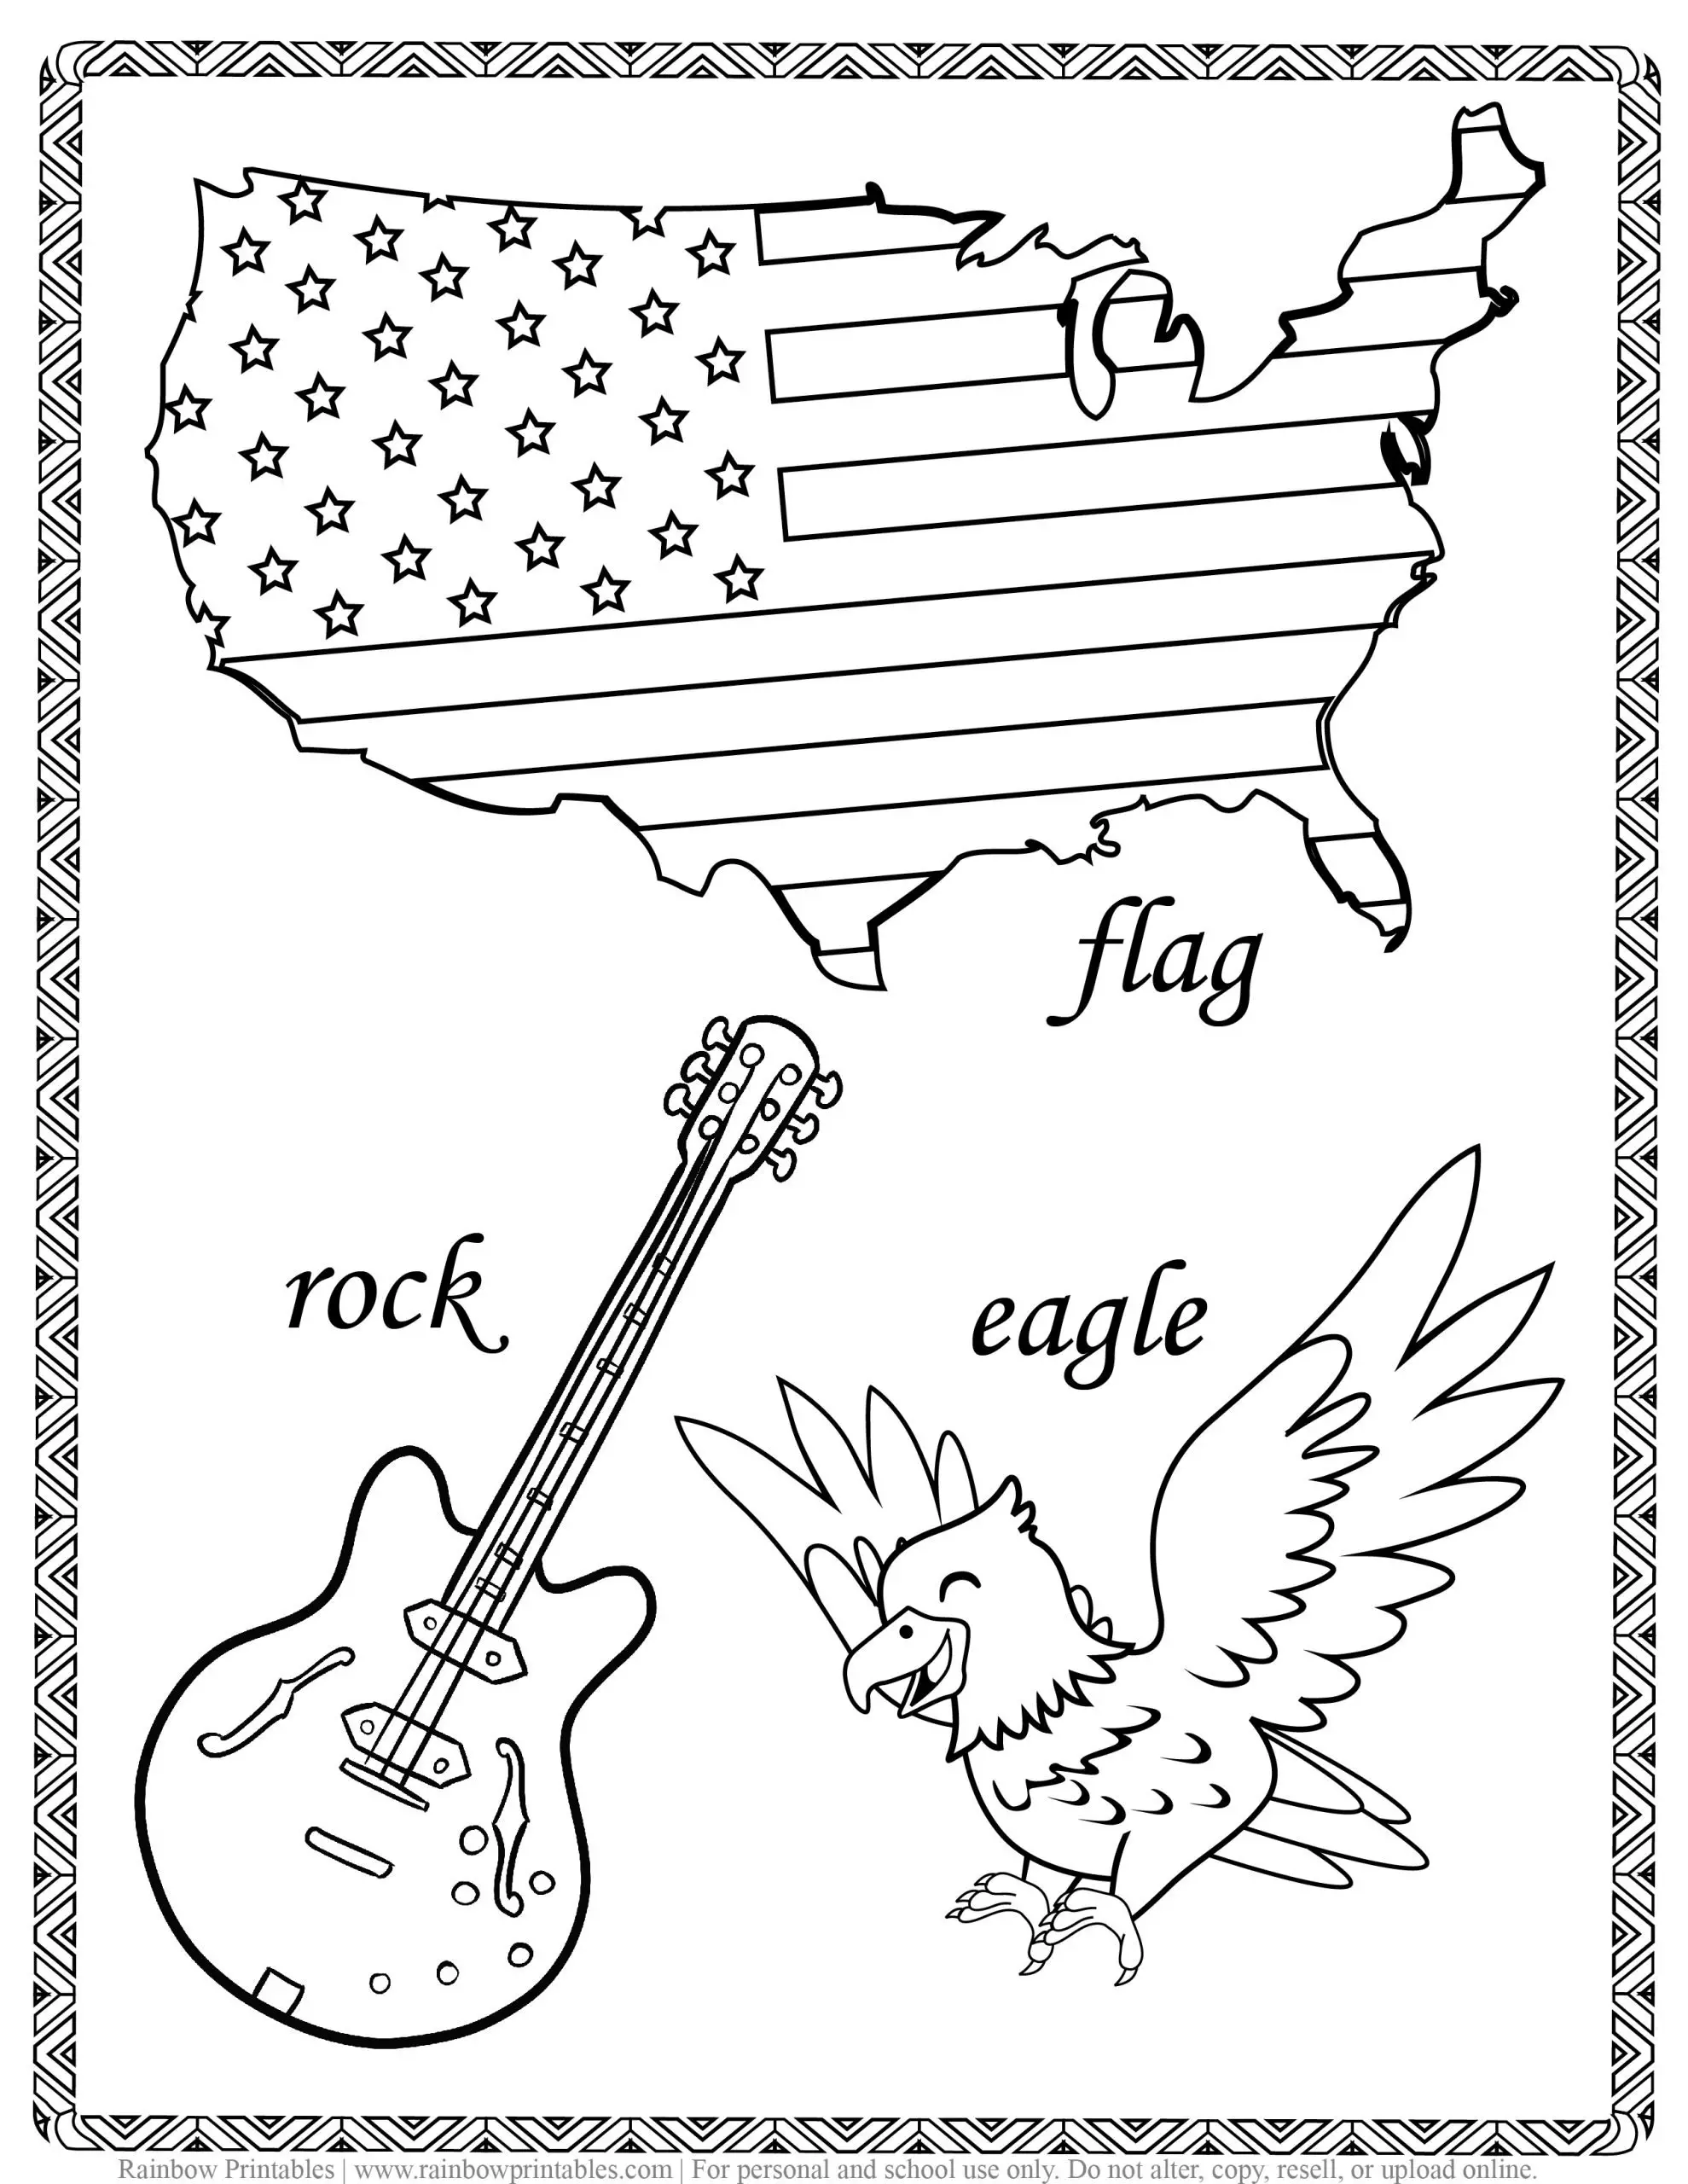 ROCK FLAG and EAGLE Sunny's Charlie Joke, America Patriotic July 4th Independence Day Printables for Kids, Toddlers, Coloring Pages, Activity for Preschool-12